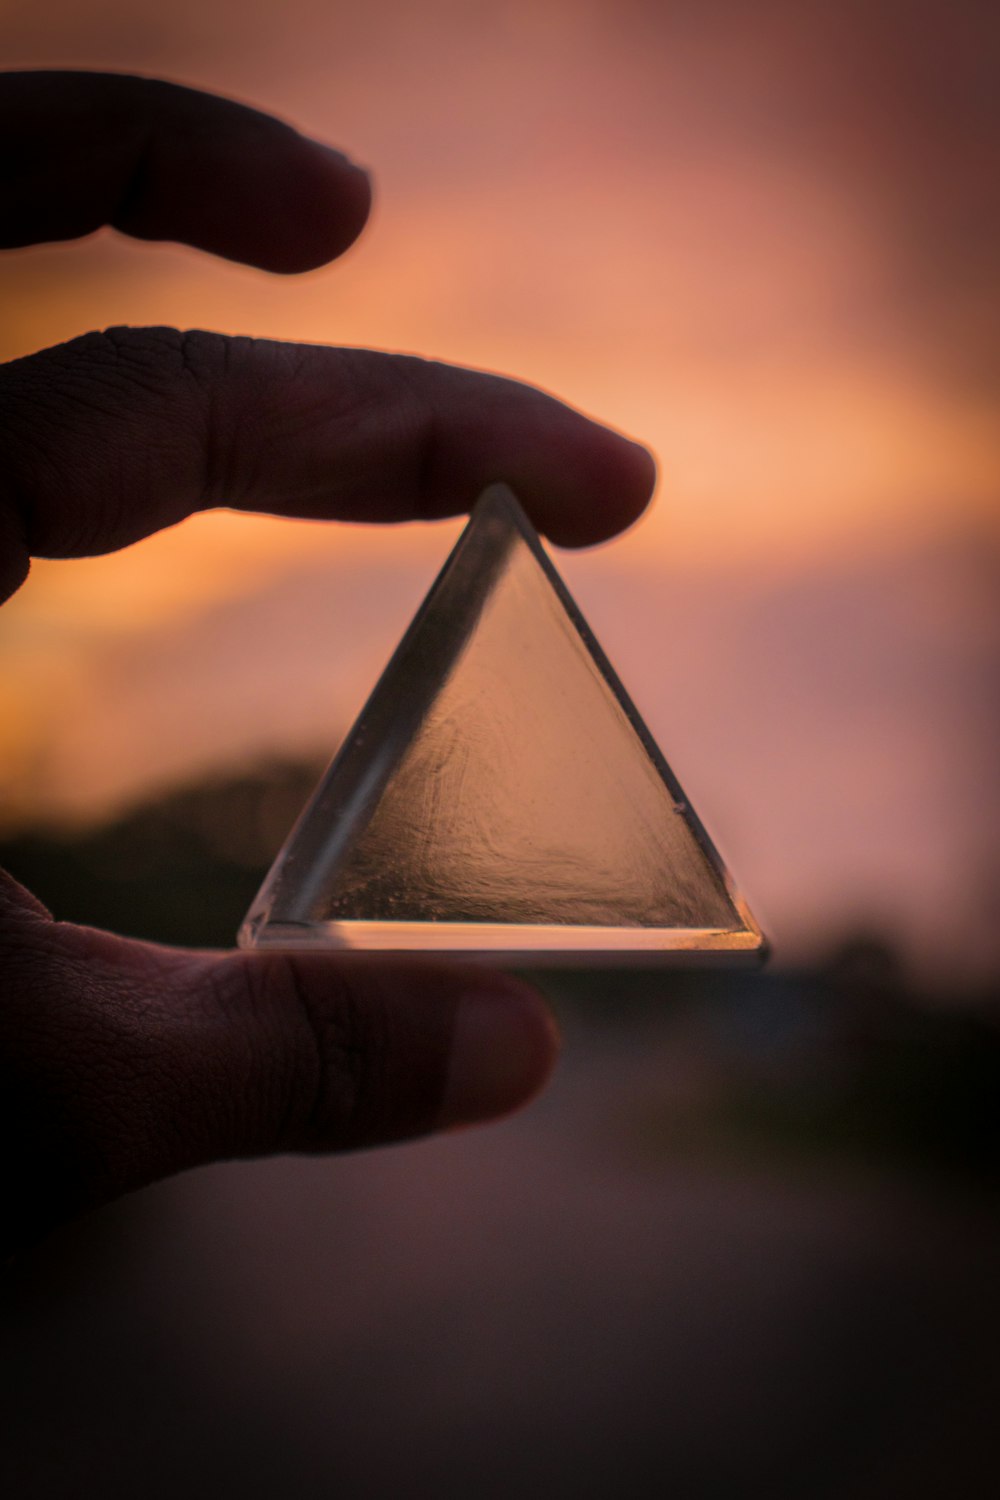 person holding triangle glass panel